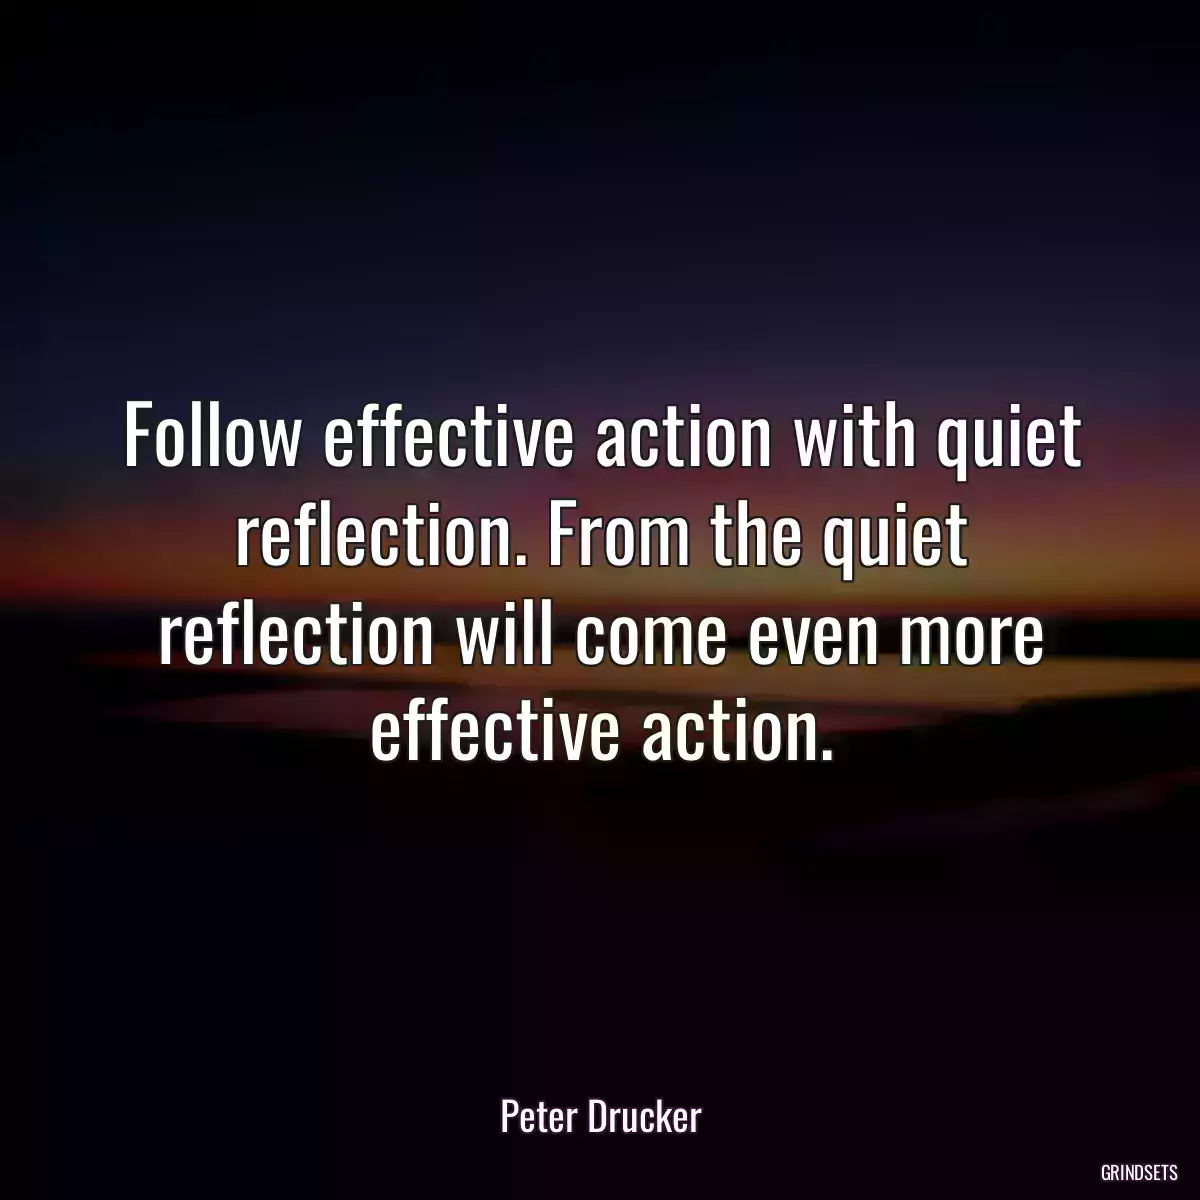 Follow effective action with quiet reflection. From the quiet reflection will come even more effective action.